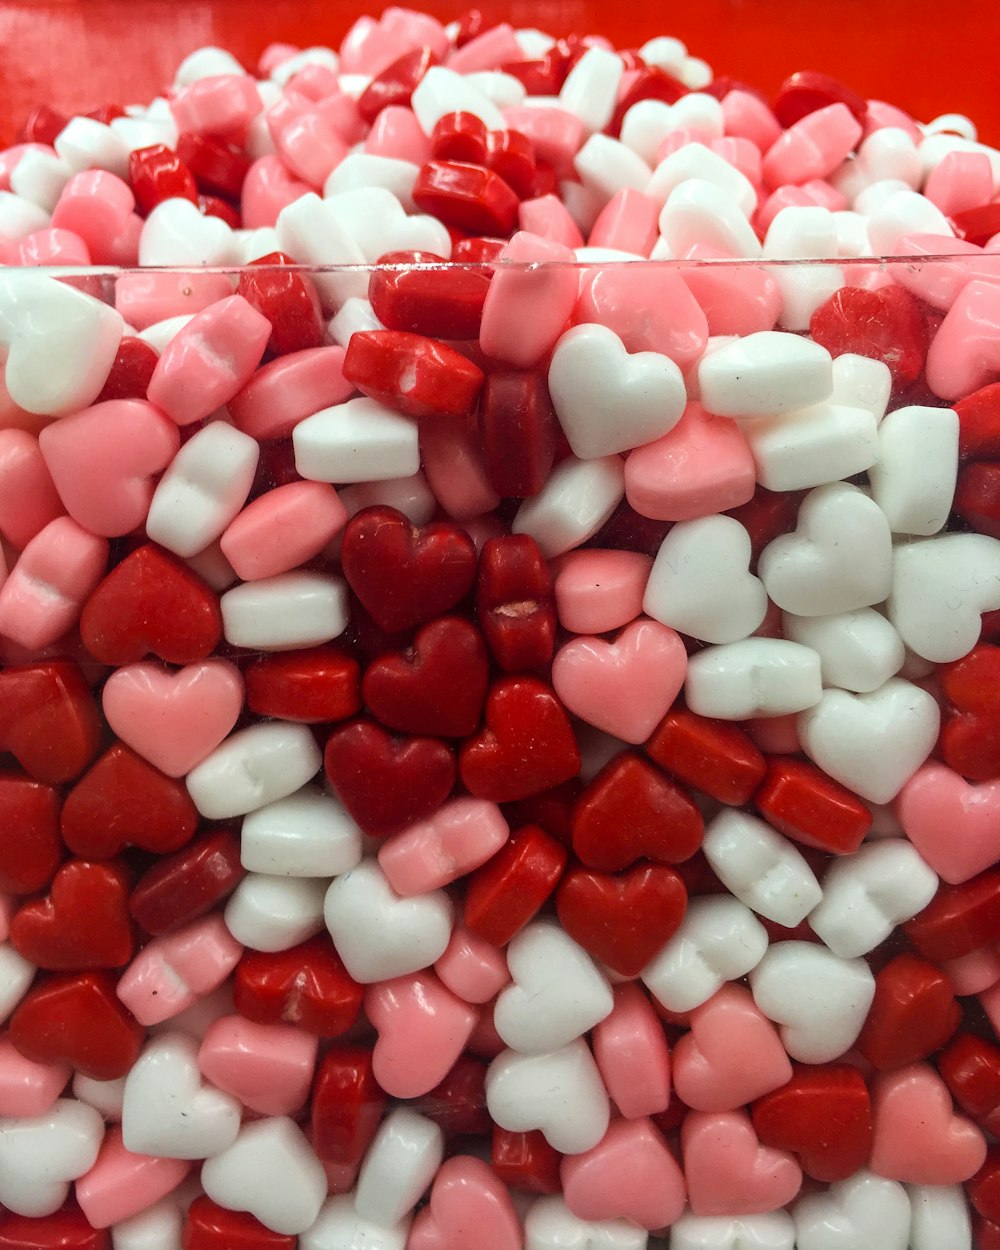 white and red heart candies photo – Free Tel aviv-yafo Image on Unsplash